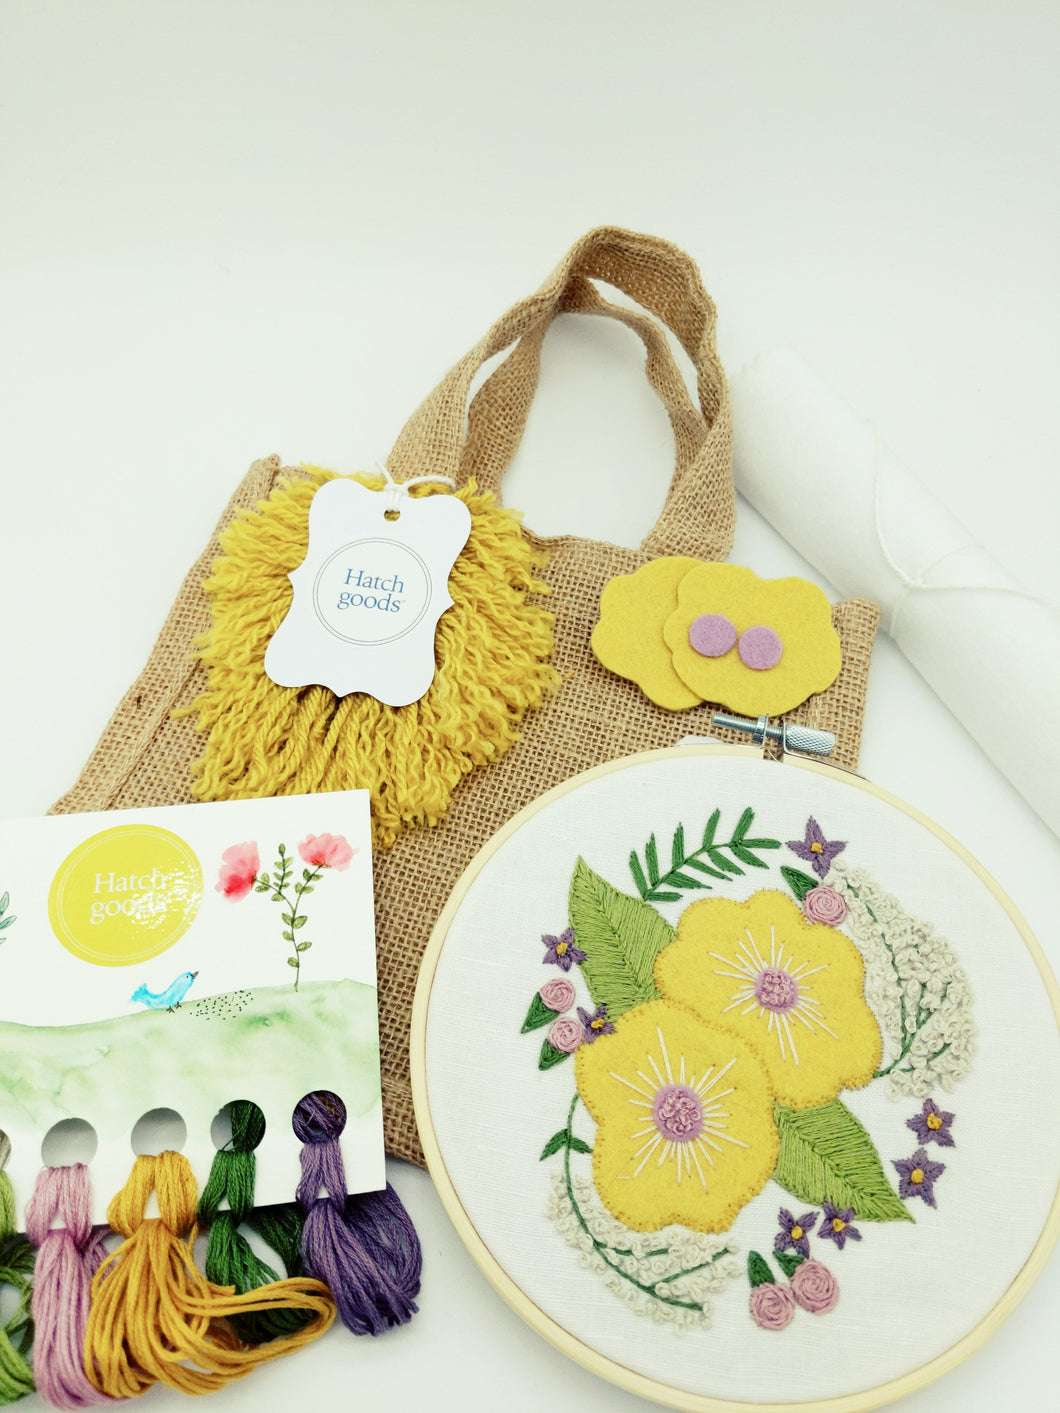 Jute bag embroidery kit includes complete project materials for felt floral pattern iron-on-ready pattern. Includes hoop, DMC thread, linen/cotton fabric, felt pieces and full stitch instructions.